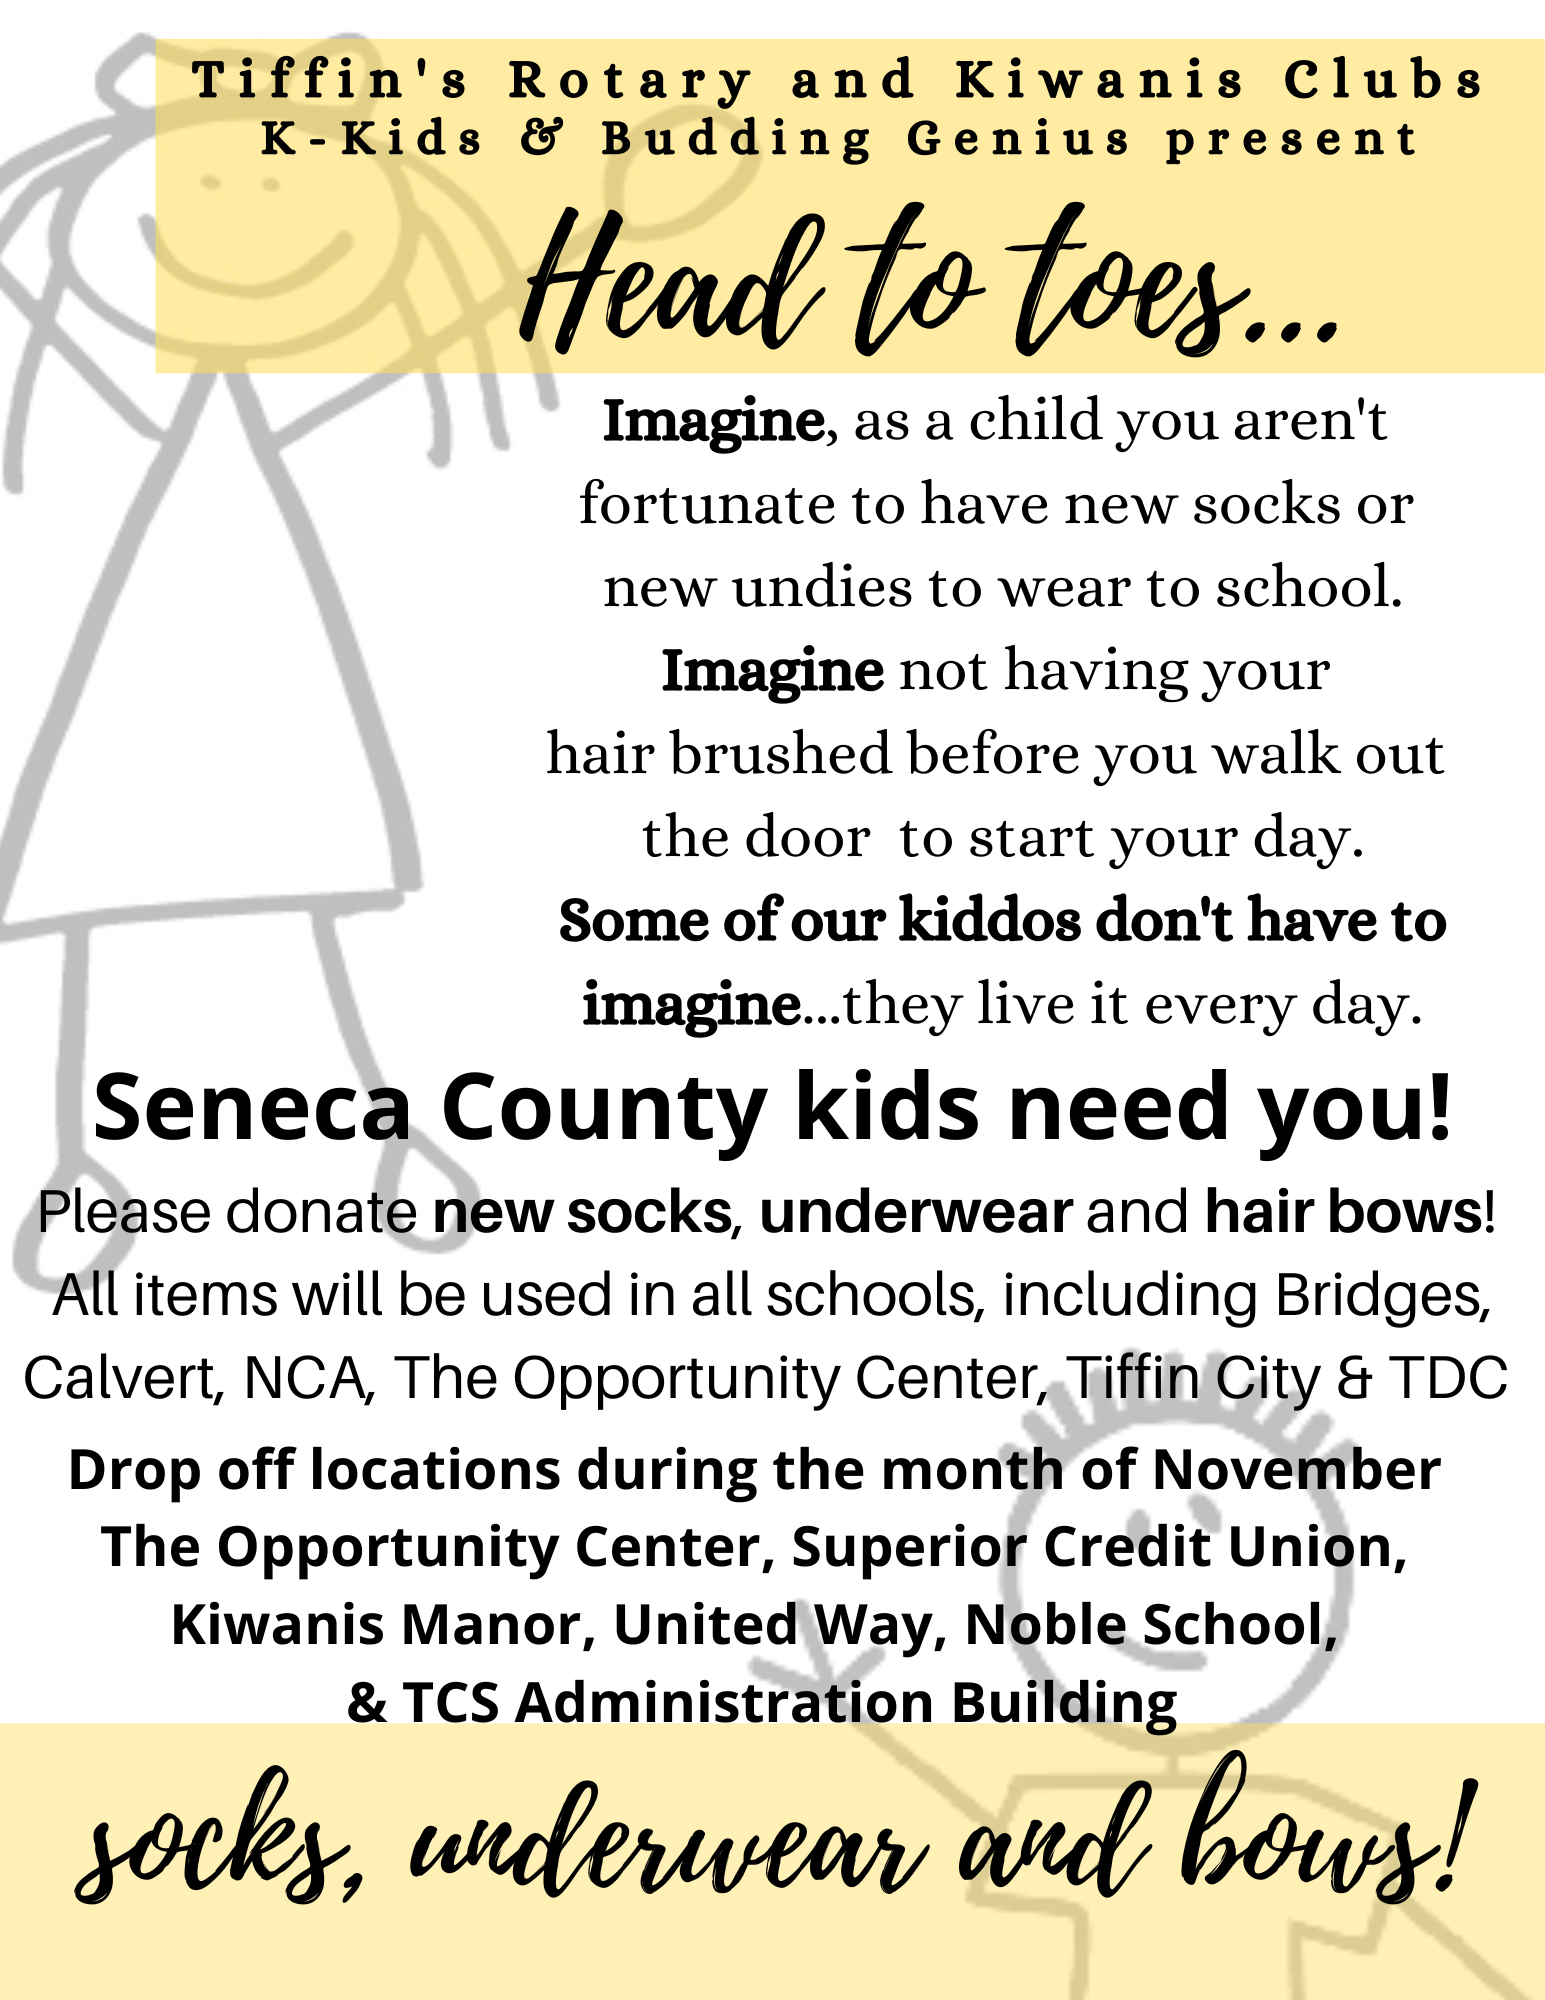 Tiffin's Rotary and Kiwanis Clubs K-Kids & Budding Genius  Present Head to Toes